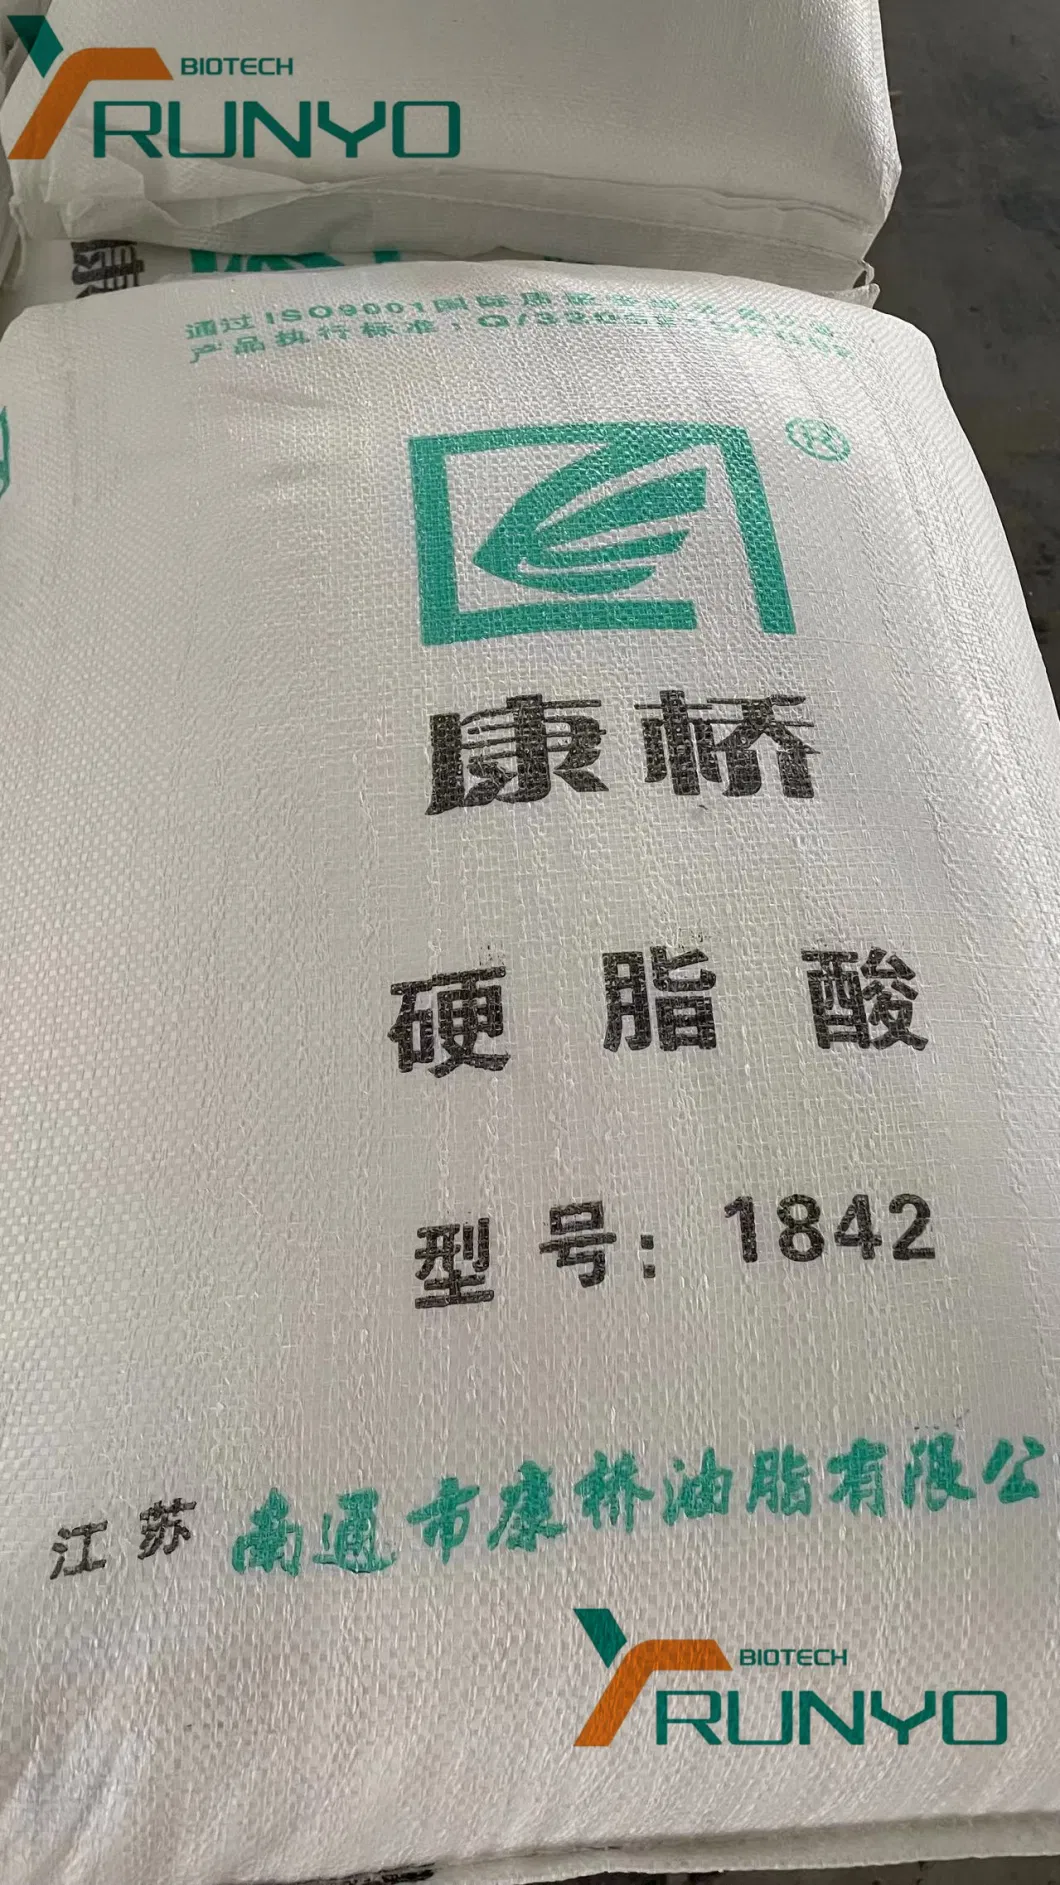 Manufacturers Provide Superior Quality Industrial Grade Stearic Acid CAS 57-11-4 with a Good Price